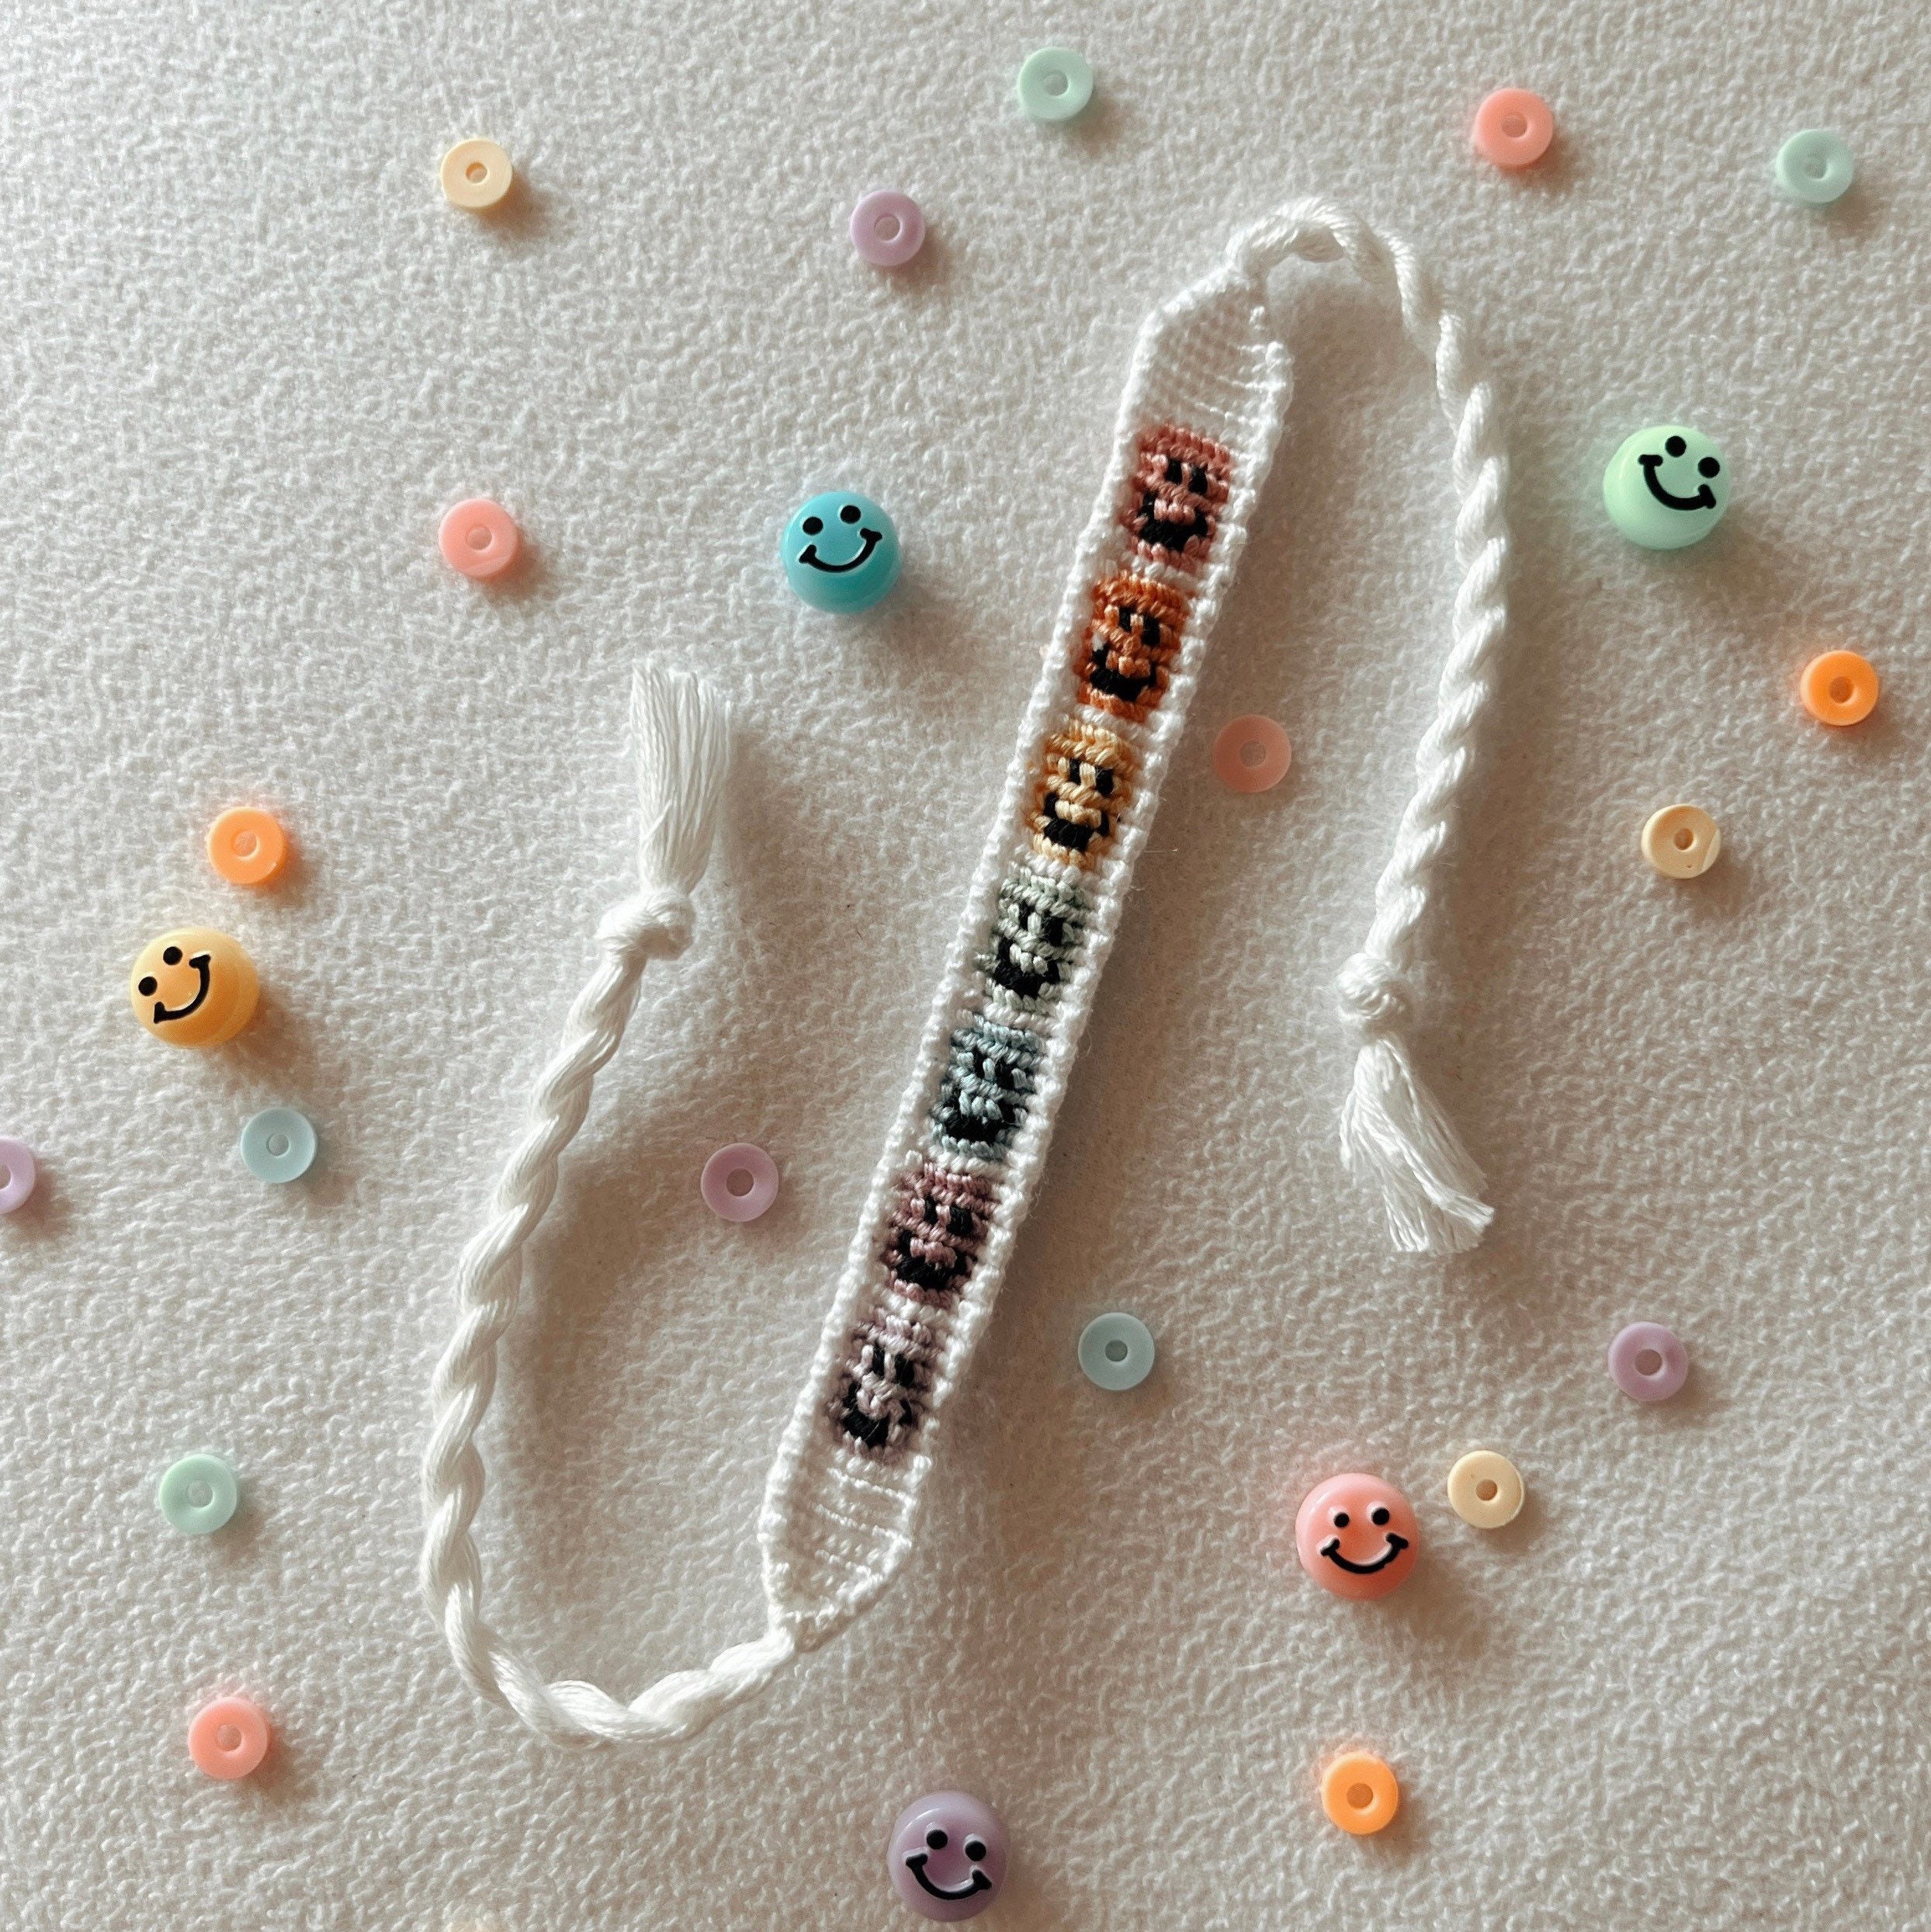 Clay Bead/flat Bead Bracelets With White Seed Beads 